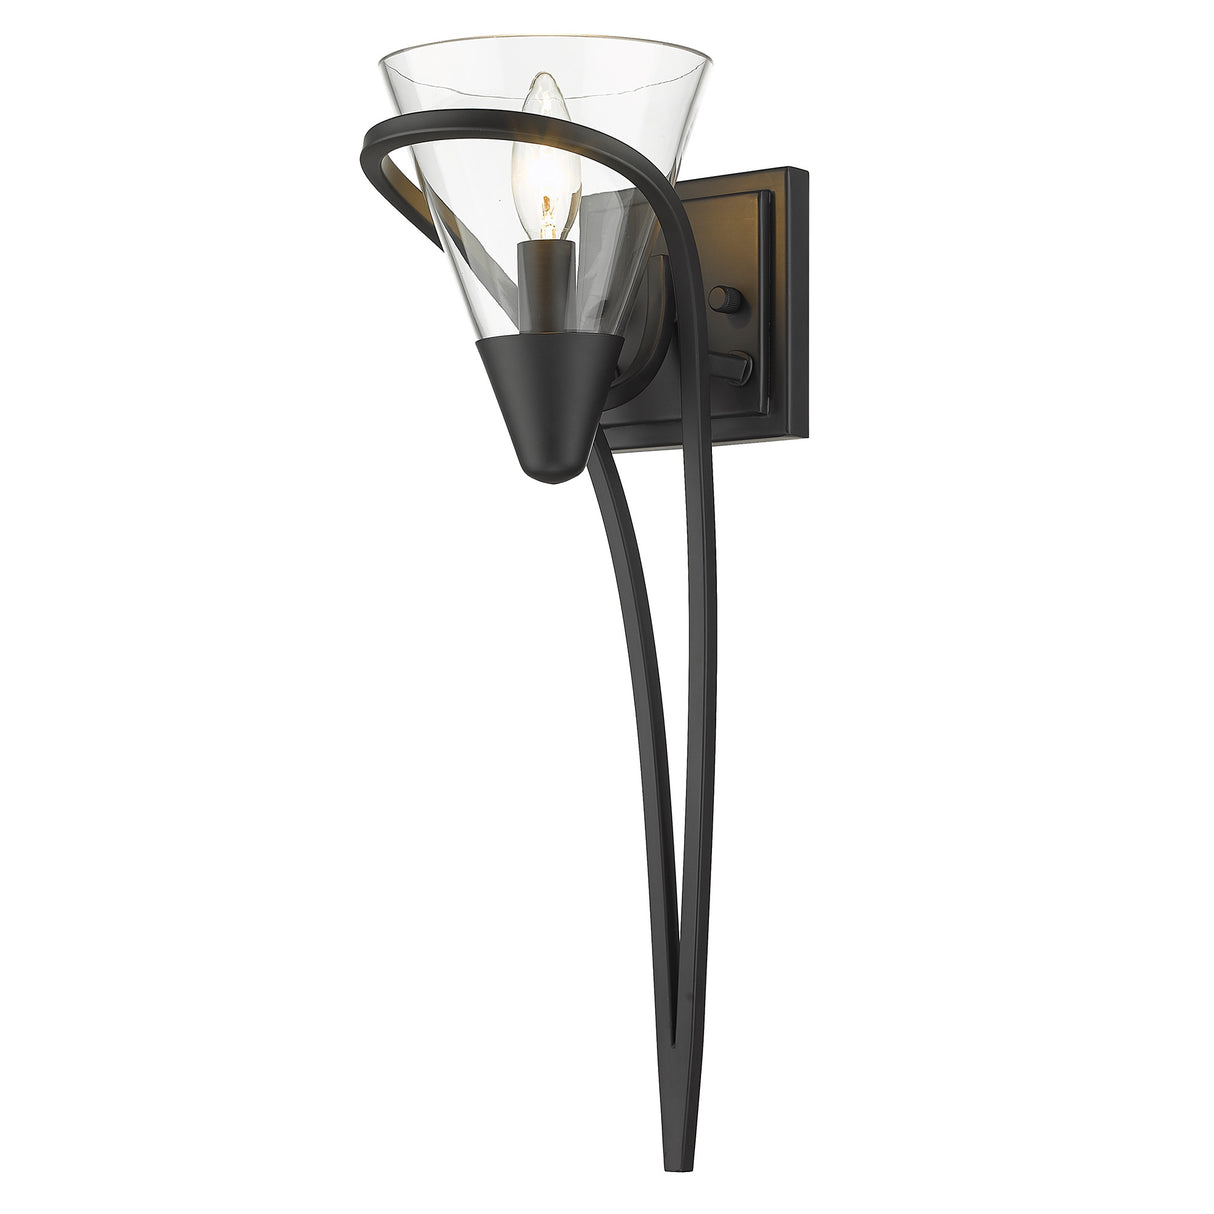 Olympia 1 Light Wall Sconce in Matte Black with Clear Glass Shade